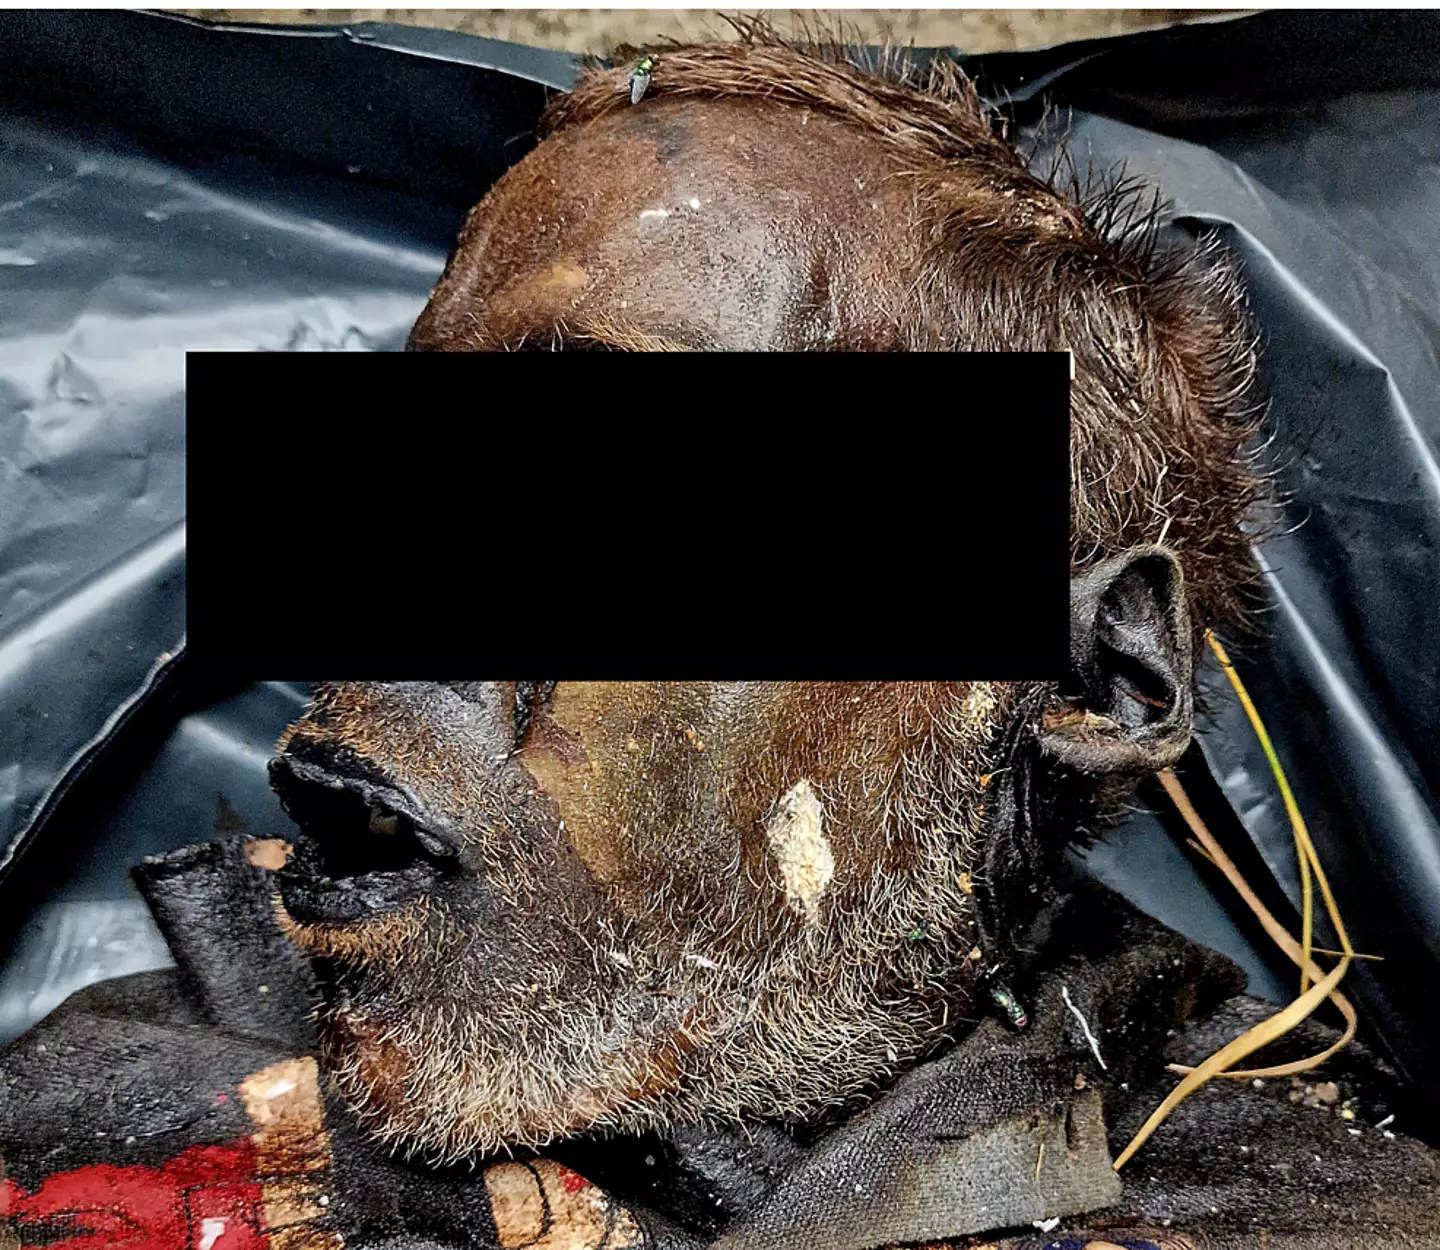 The man was last seen alive 16 days before he was found in a state of 'complete mummification'.